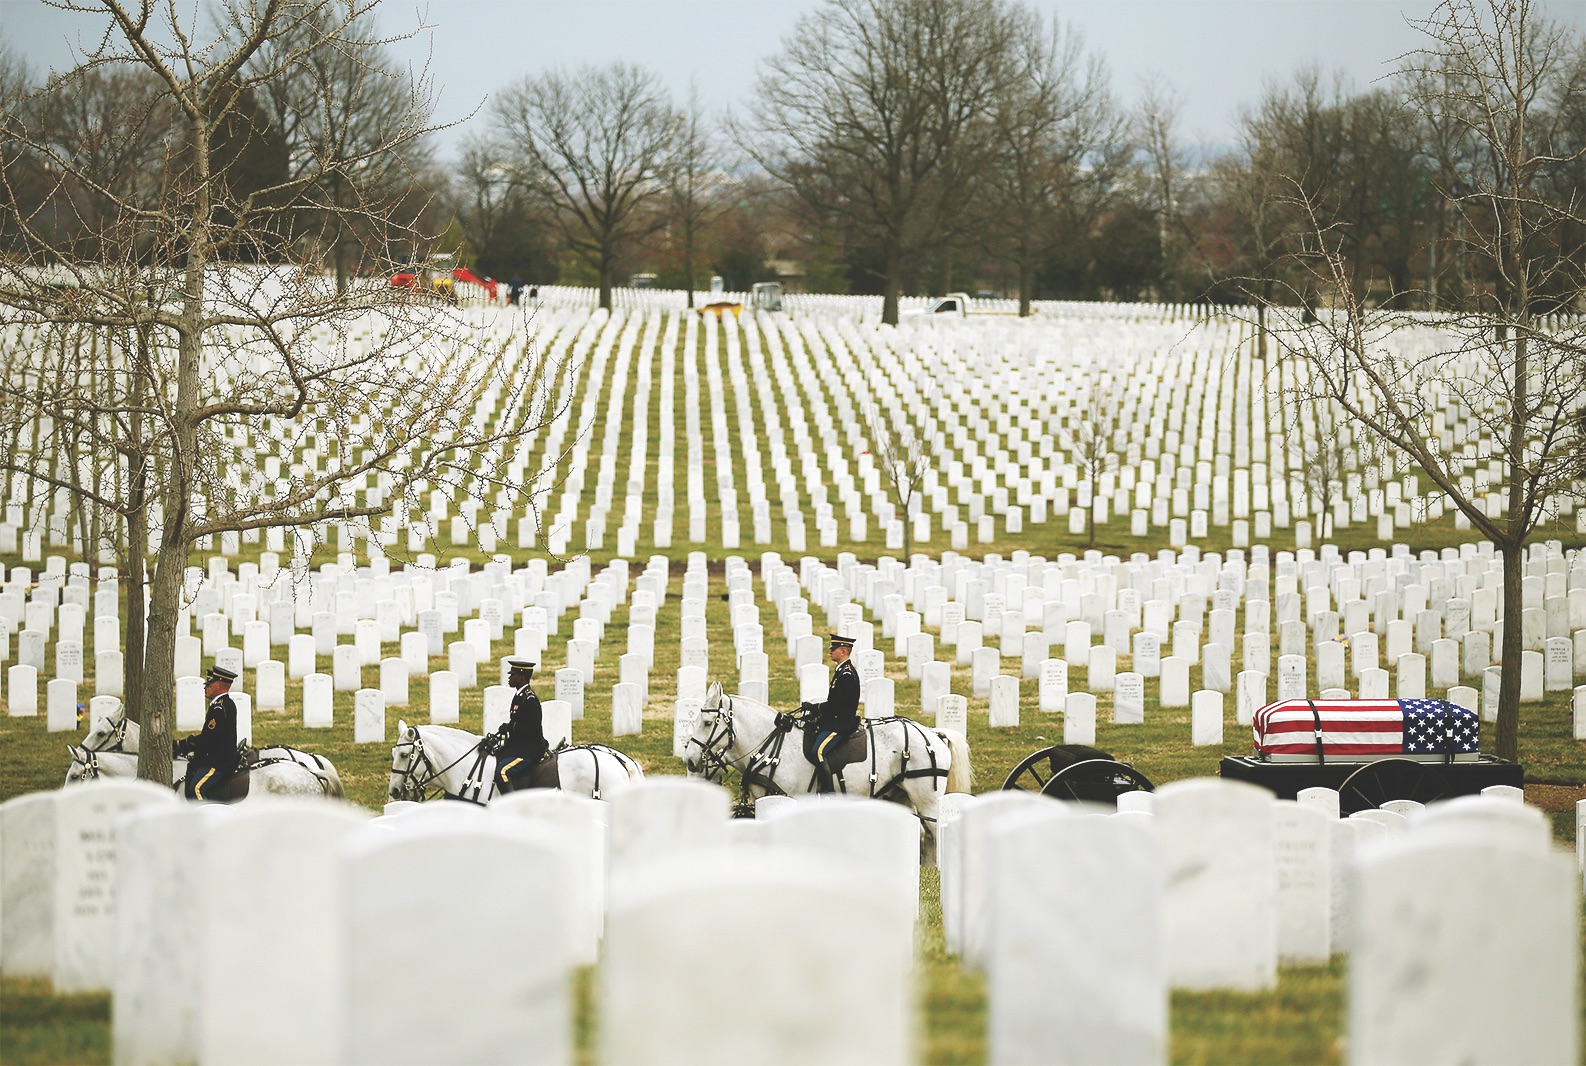 A funeral service at Arlington National Cemetery on March 21, 2014, honors seven men whose remains are being buried five decades after they were killed in a 1964 helicopter crash in Vietnam. (Mark Wilson/Getty Images)